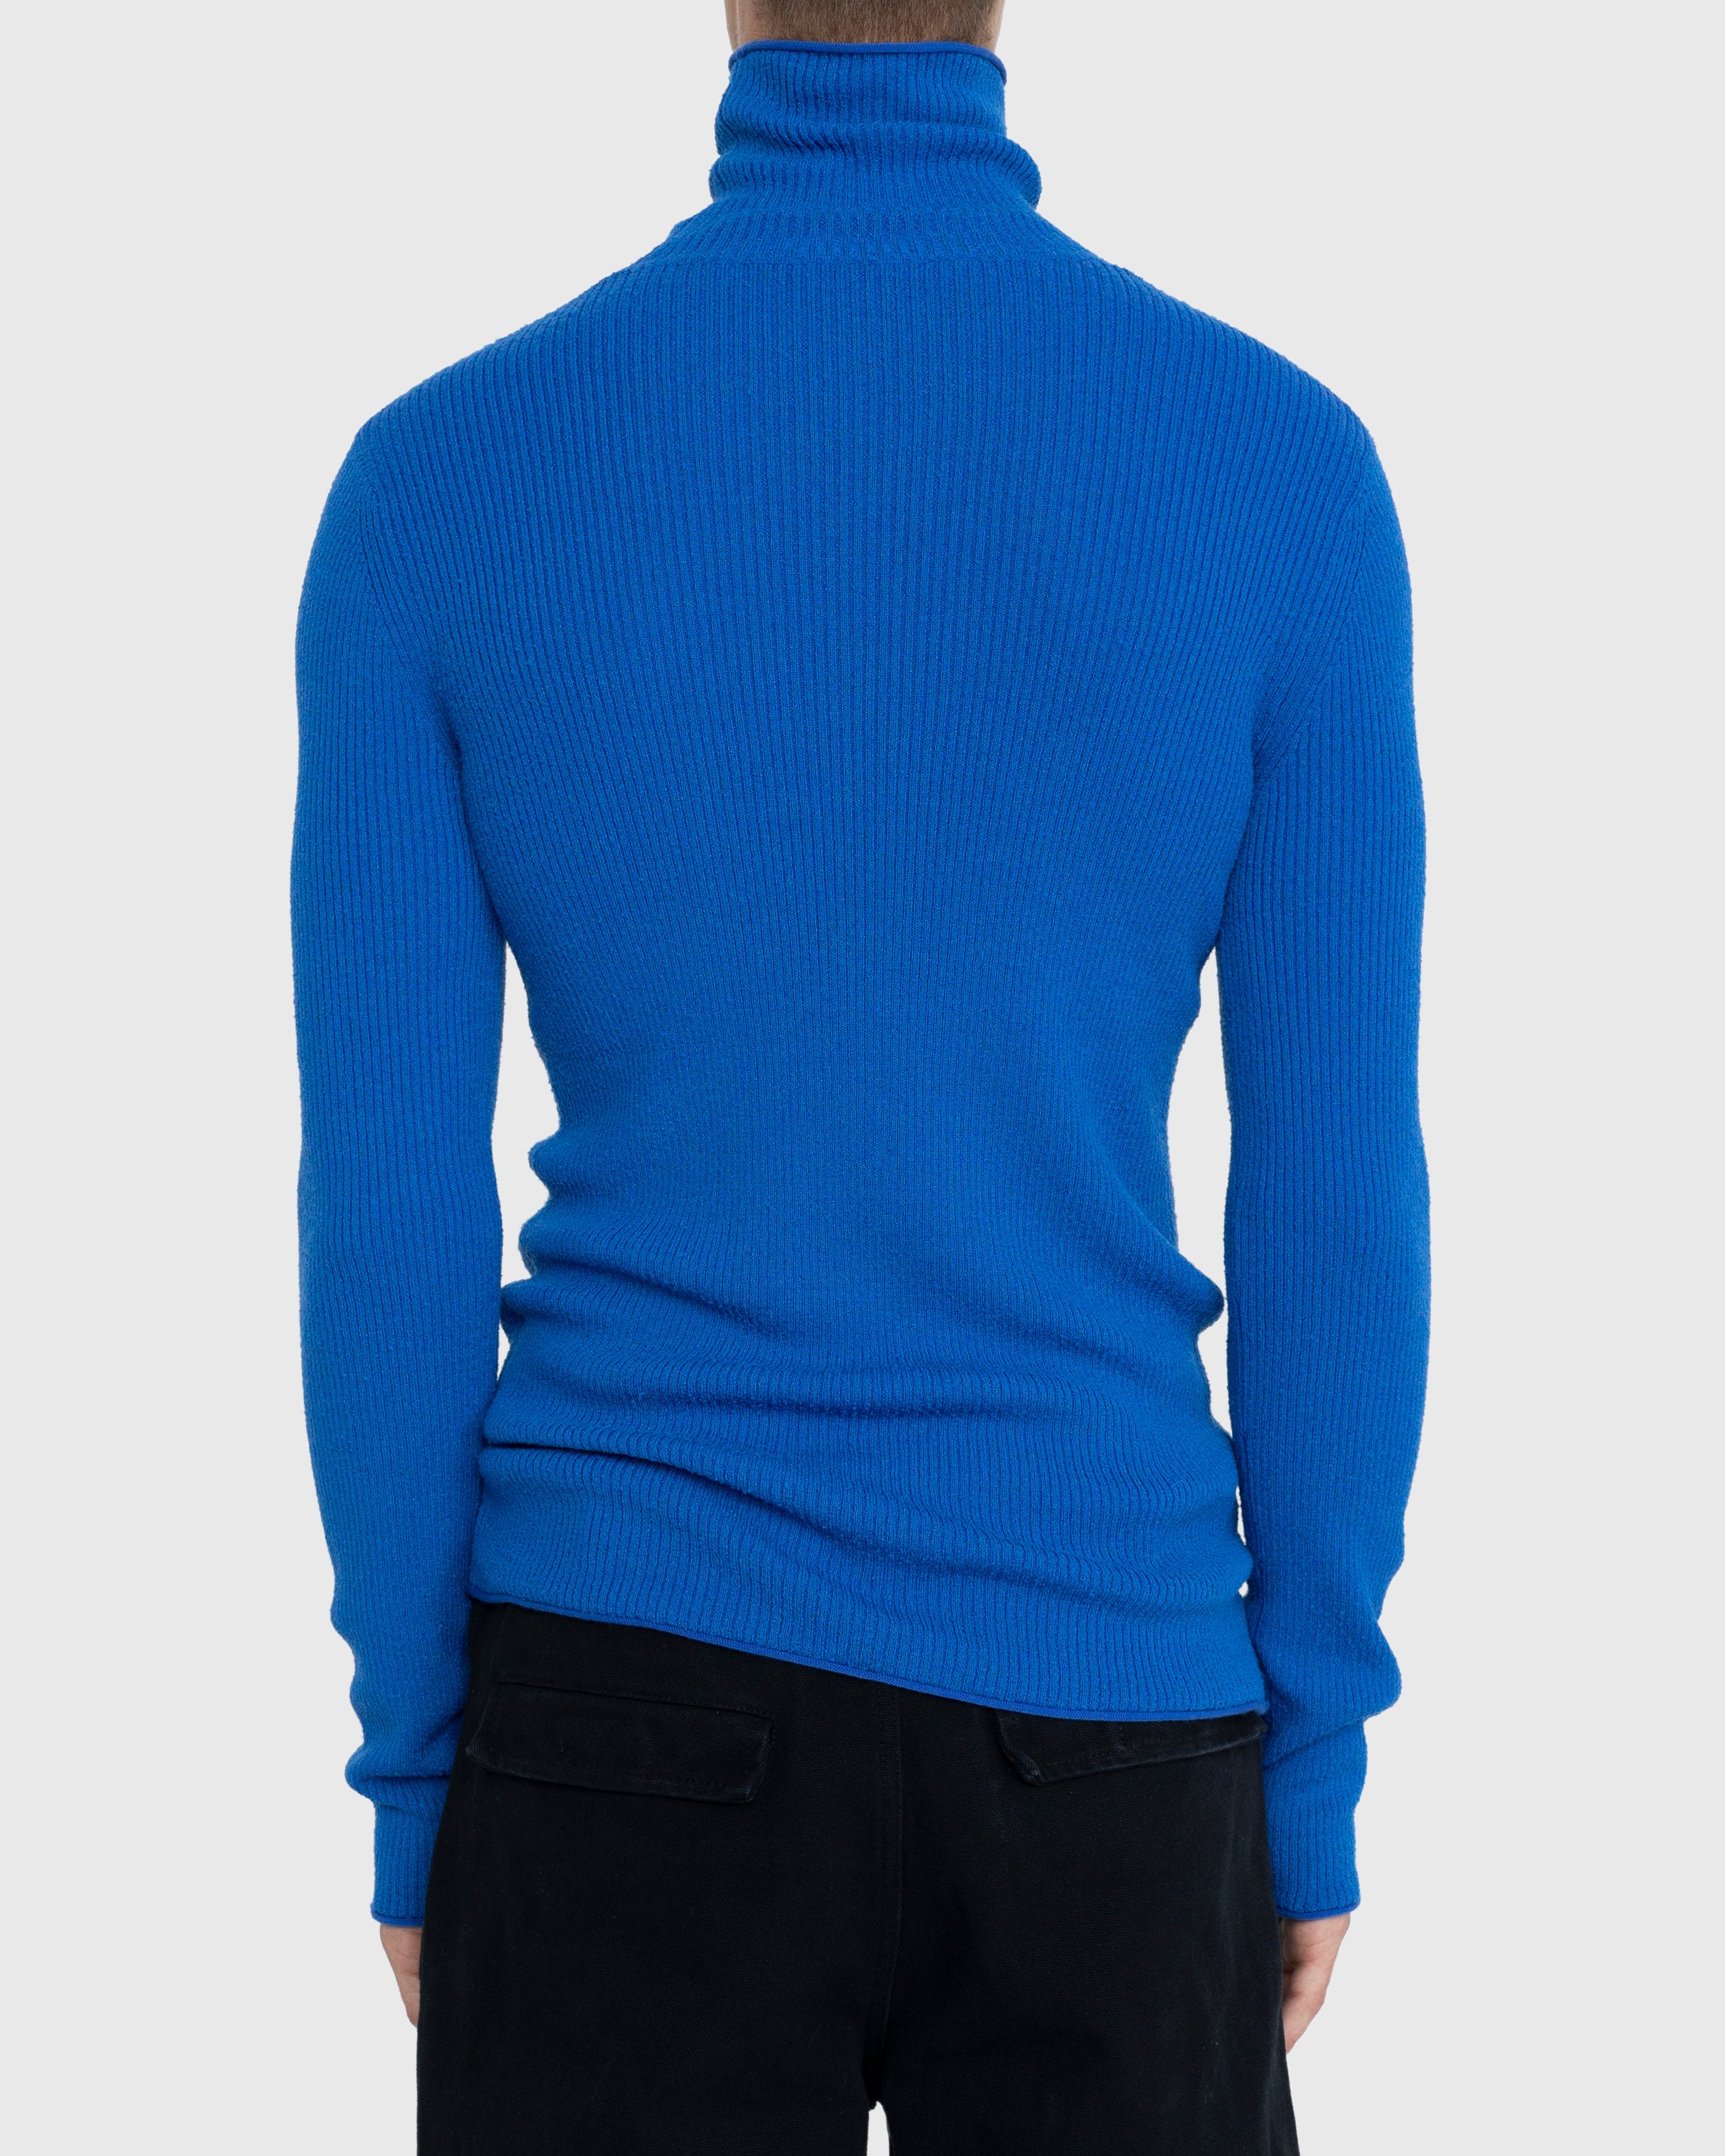 Acne Studios - Roll Neck Ribbed Knit Sweater Ultramarine Blue - Clothing - Blue - Image 4